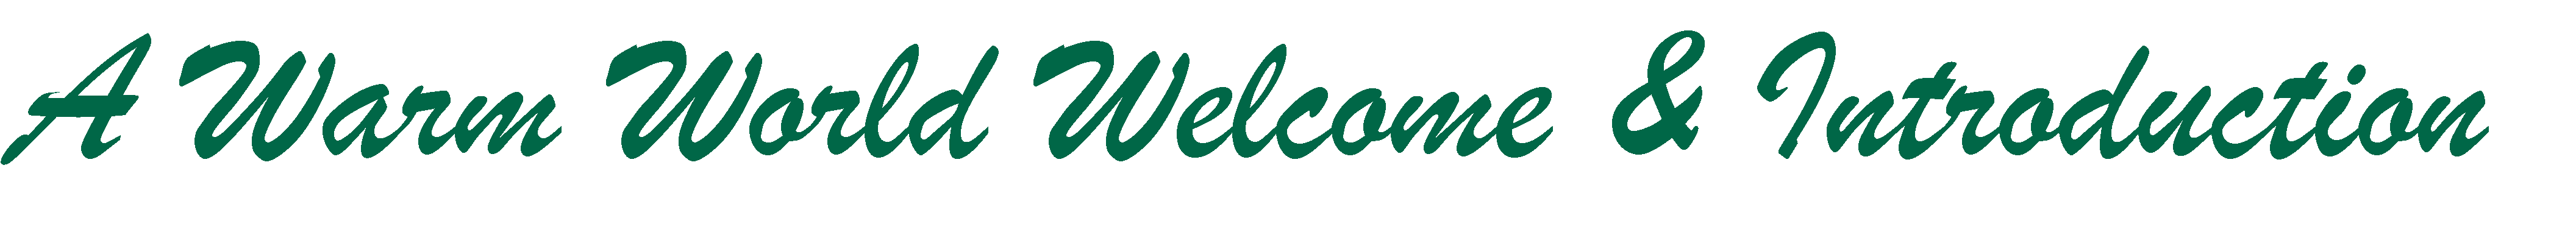 green script text: A warm world welcome and introduction